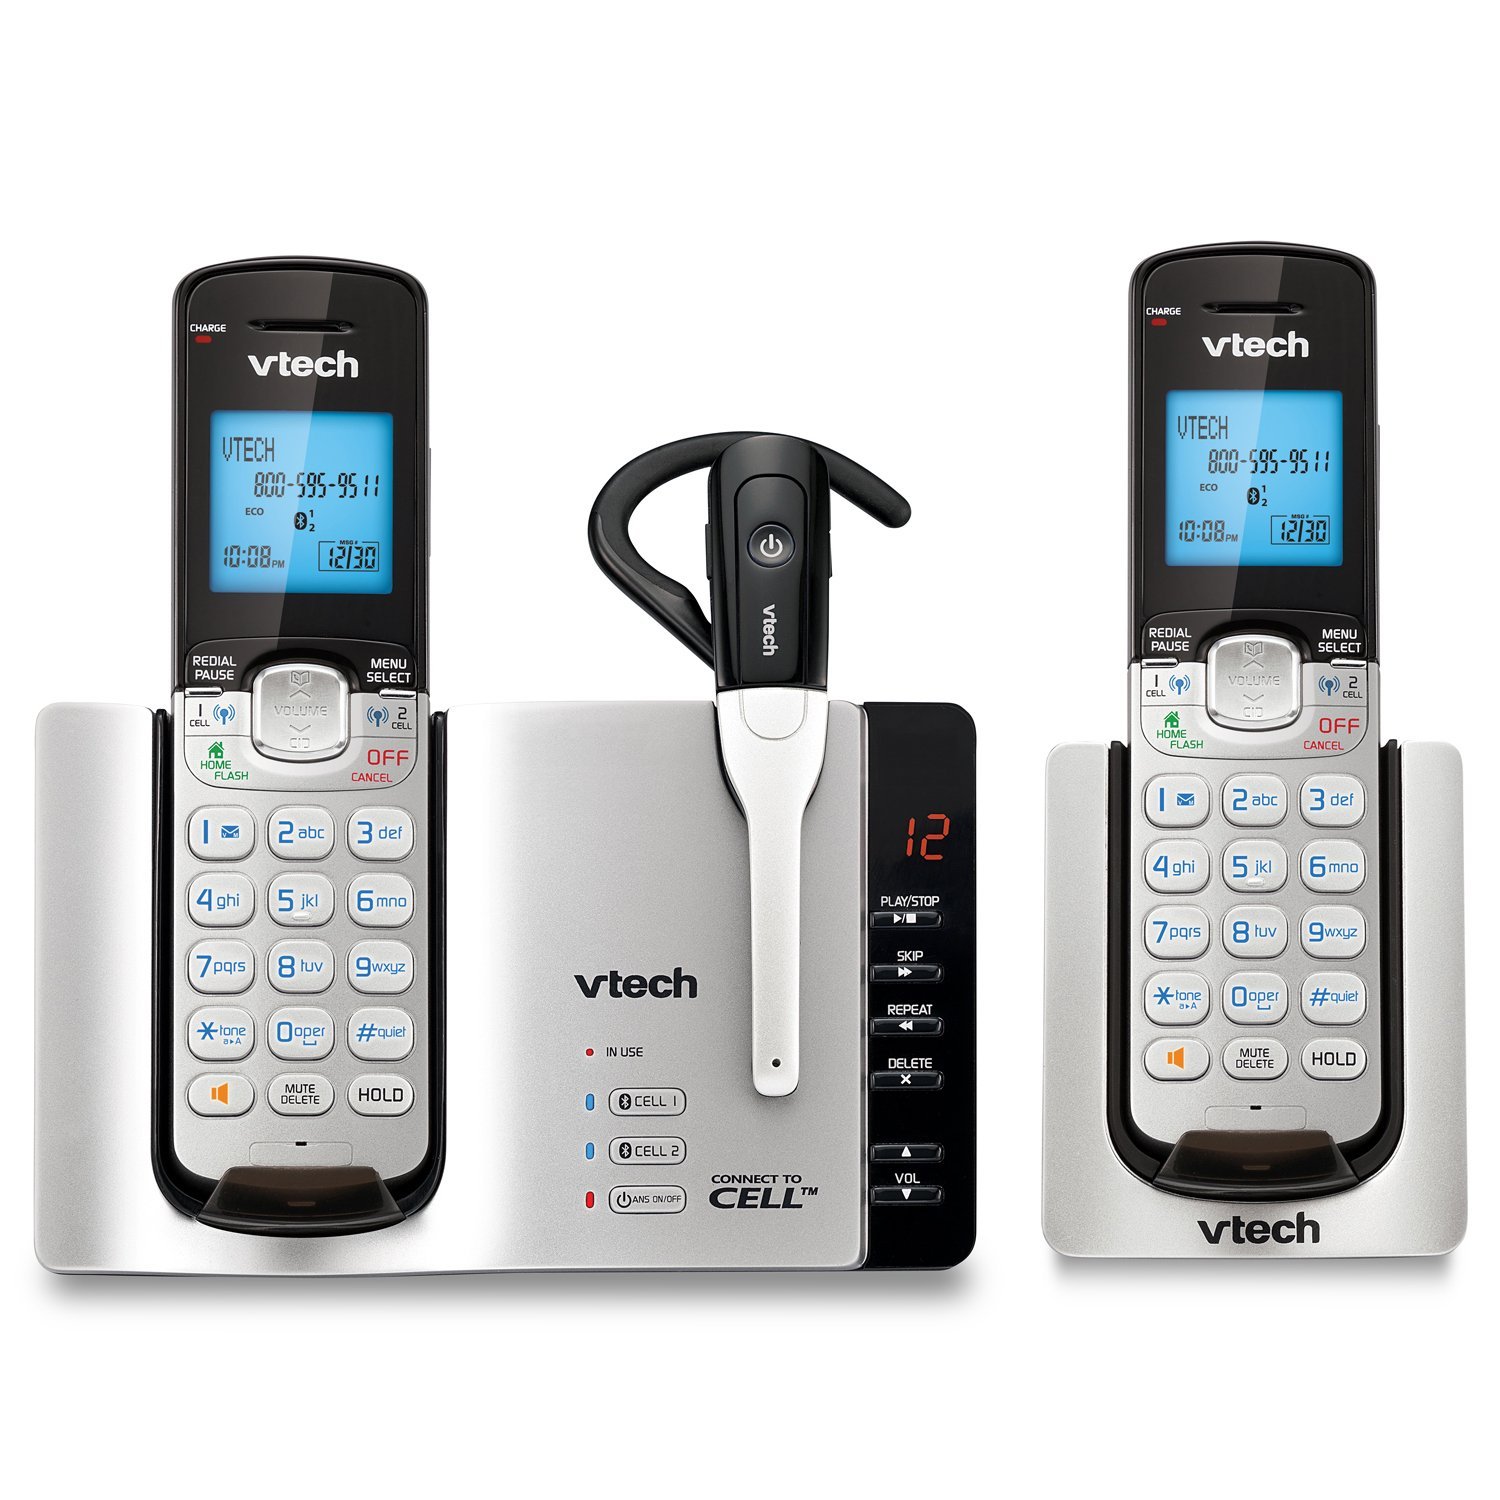 Telefono inalambrico con  Bluetooth Connect to Cell and Answering System, plata/negro